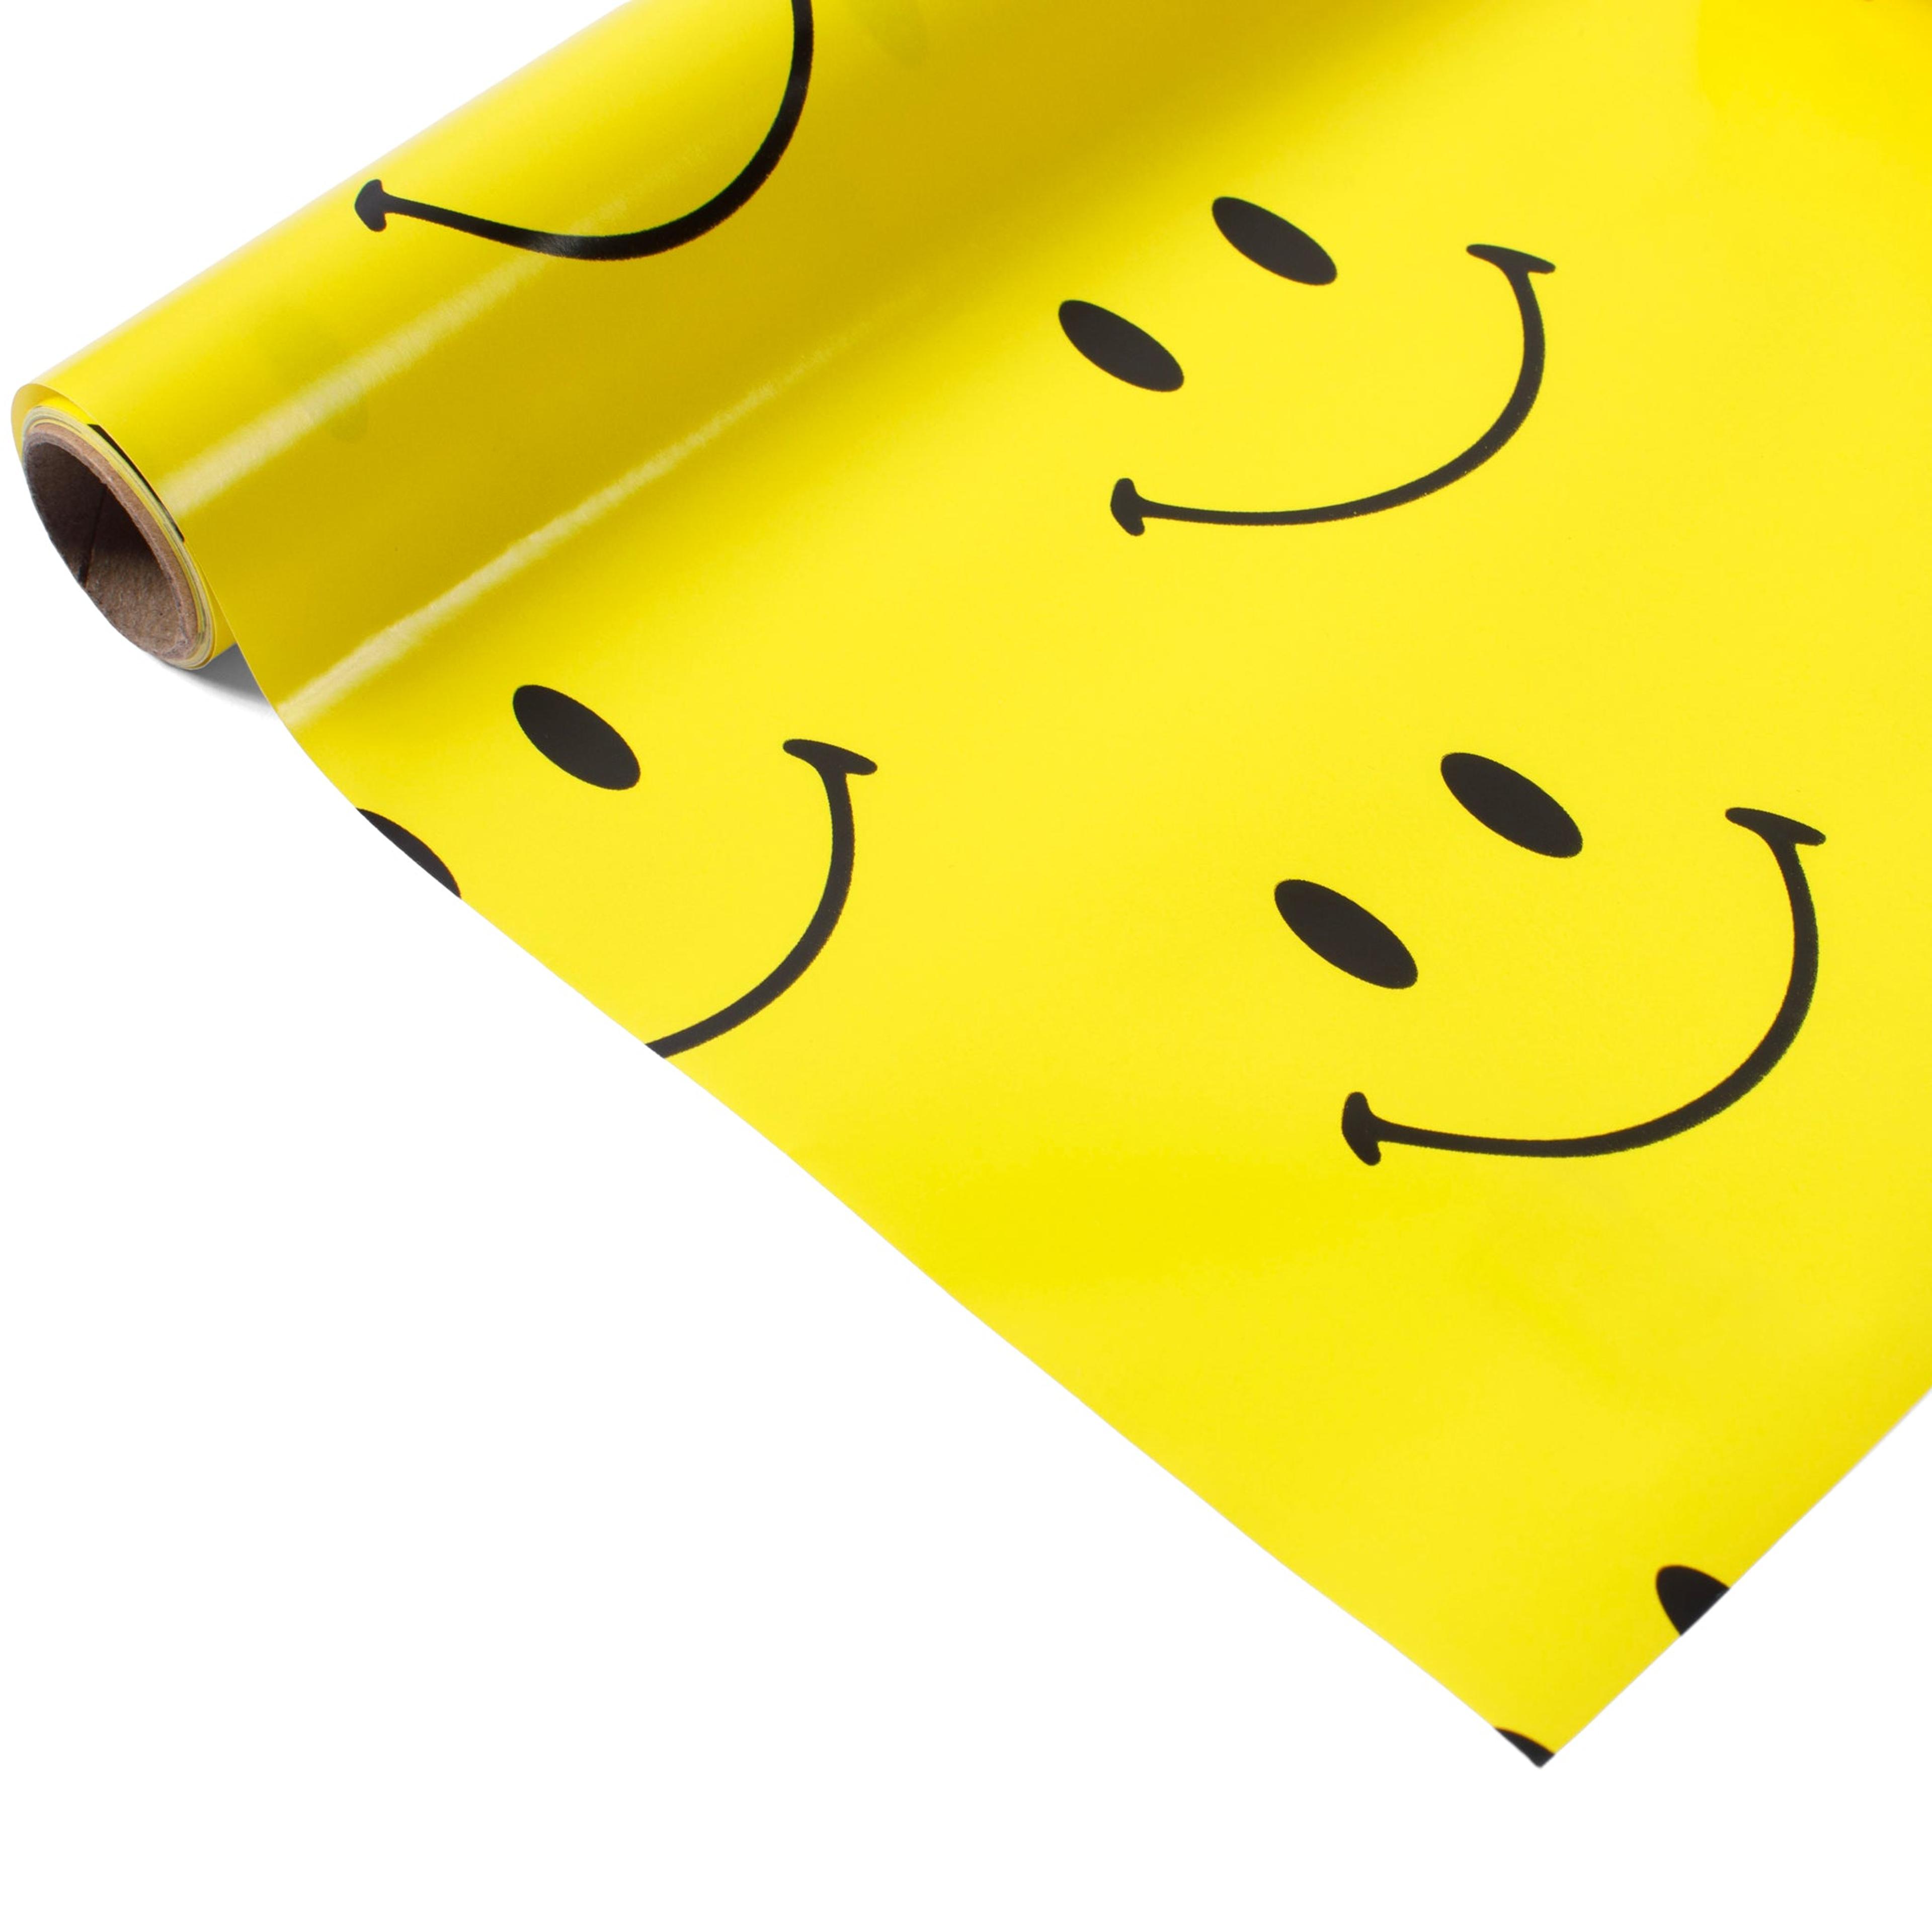 Alternate View 2 of SMILEY GIFT WRAPPING PAPER 3 PACK